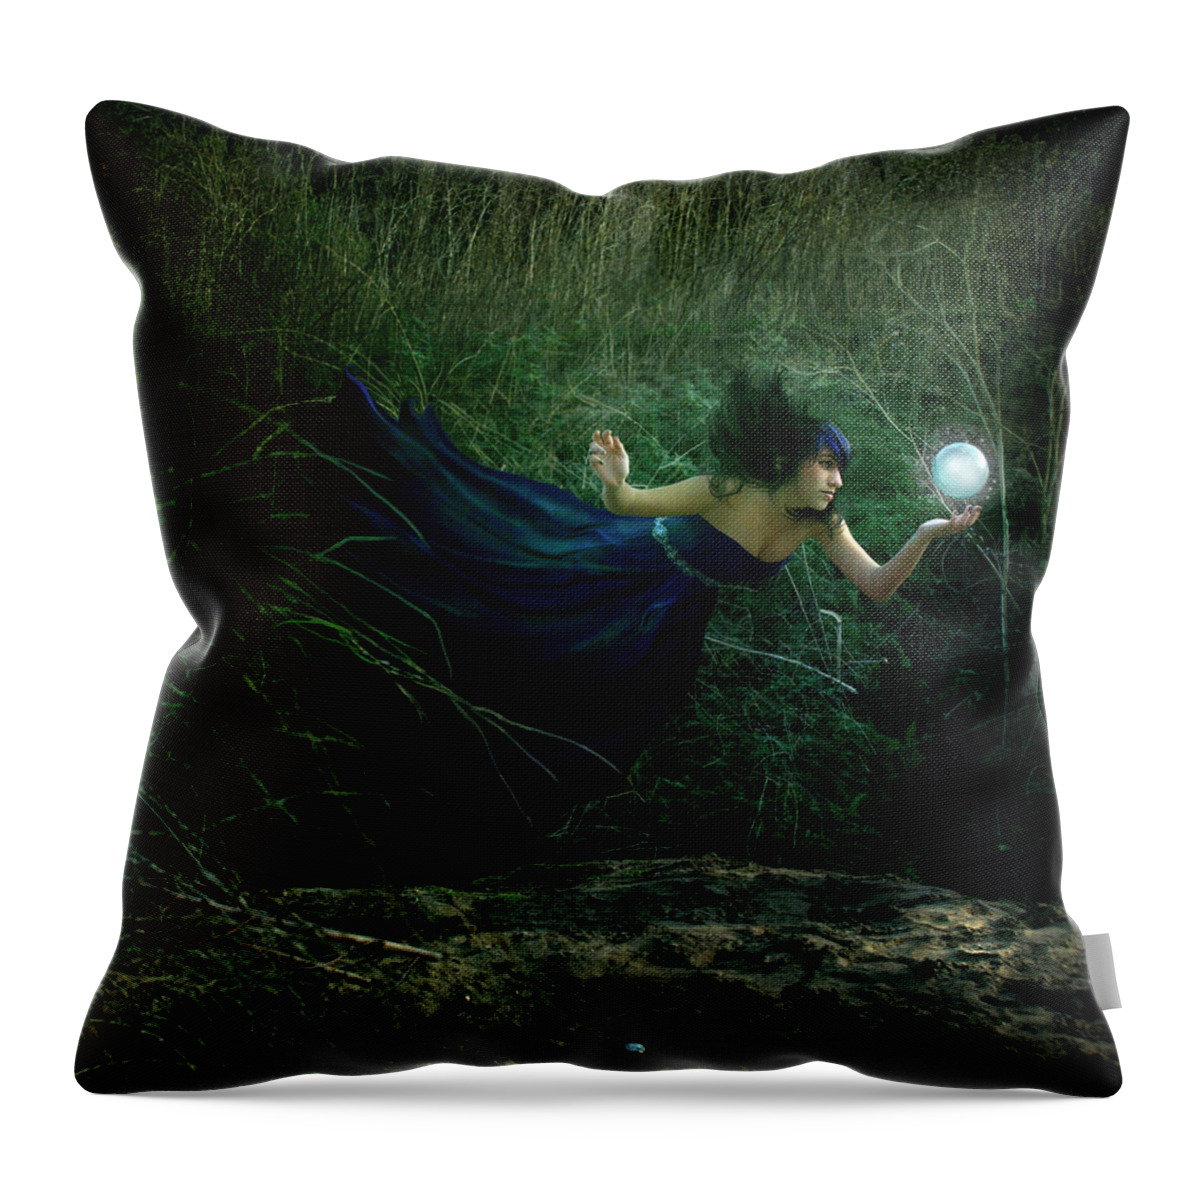 Grass Throw Pillow featuring the photograph Coming Out Of Darkness by Trini Schultz